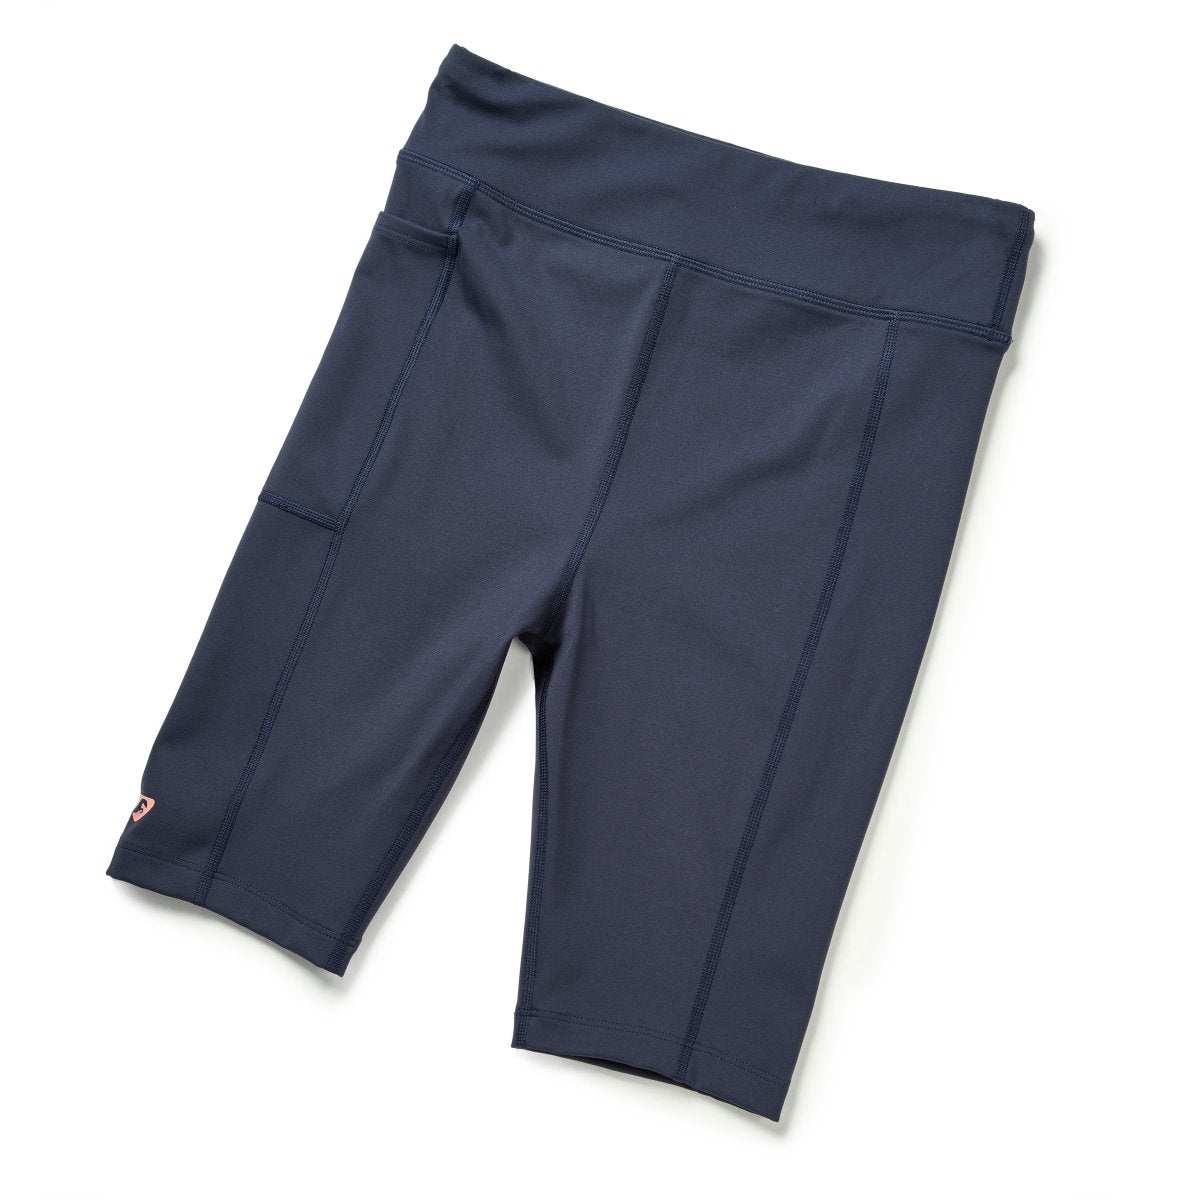 Aubrion Non-Stop Shorts - Young Rider - Navy - 11/12 Yrs